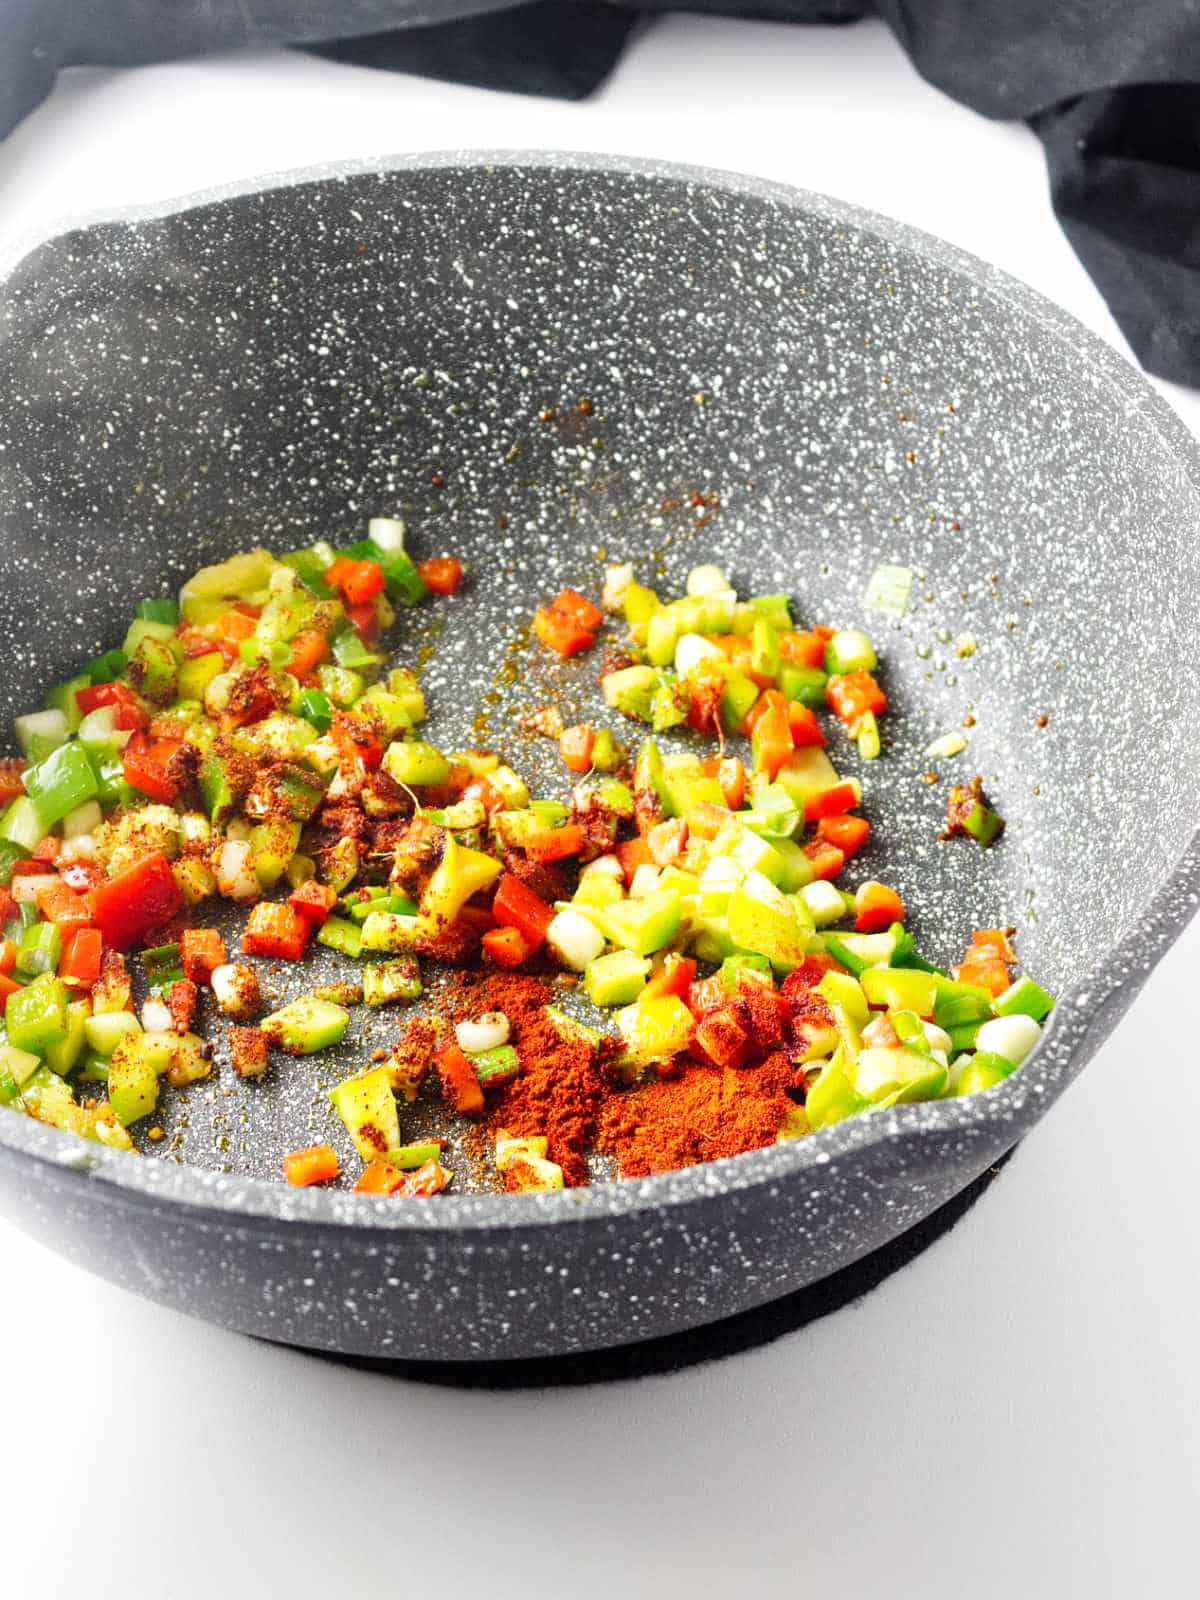 seasonings in a skillet of red and green bell peppers.